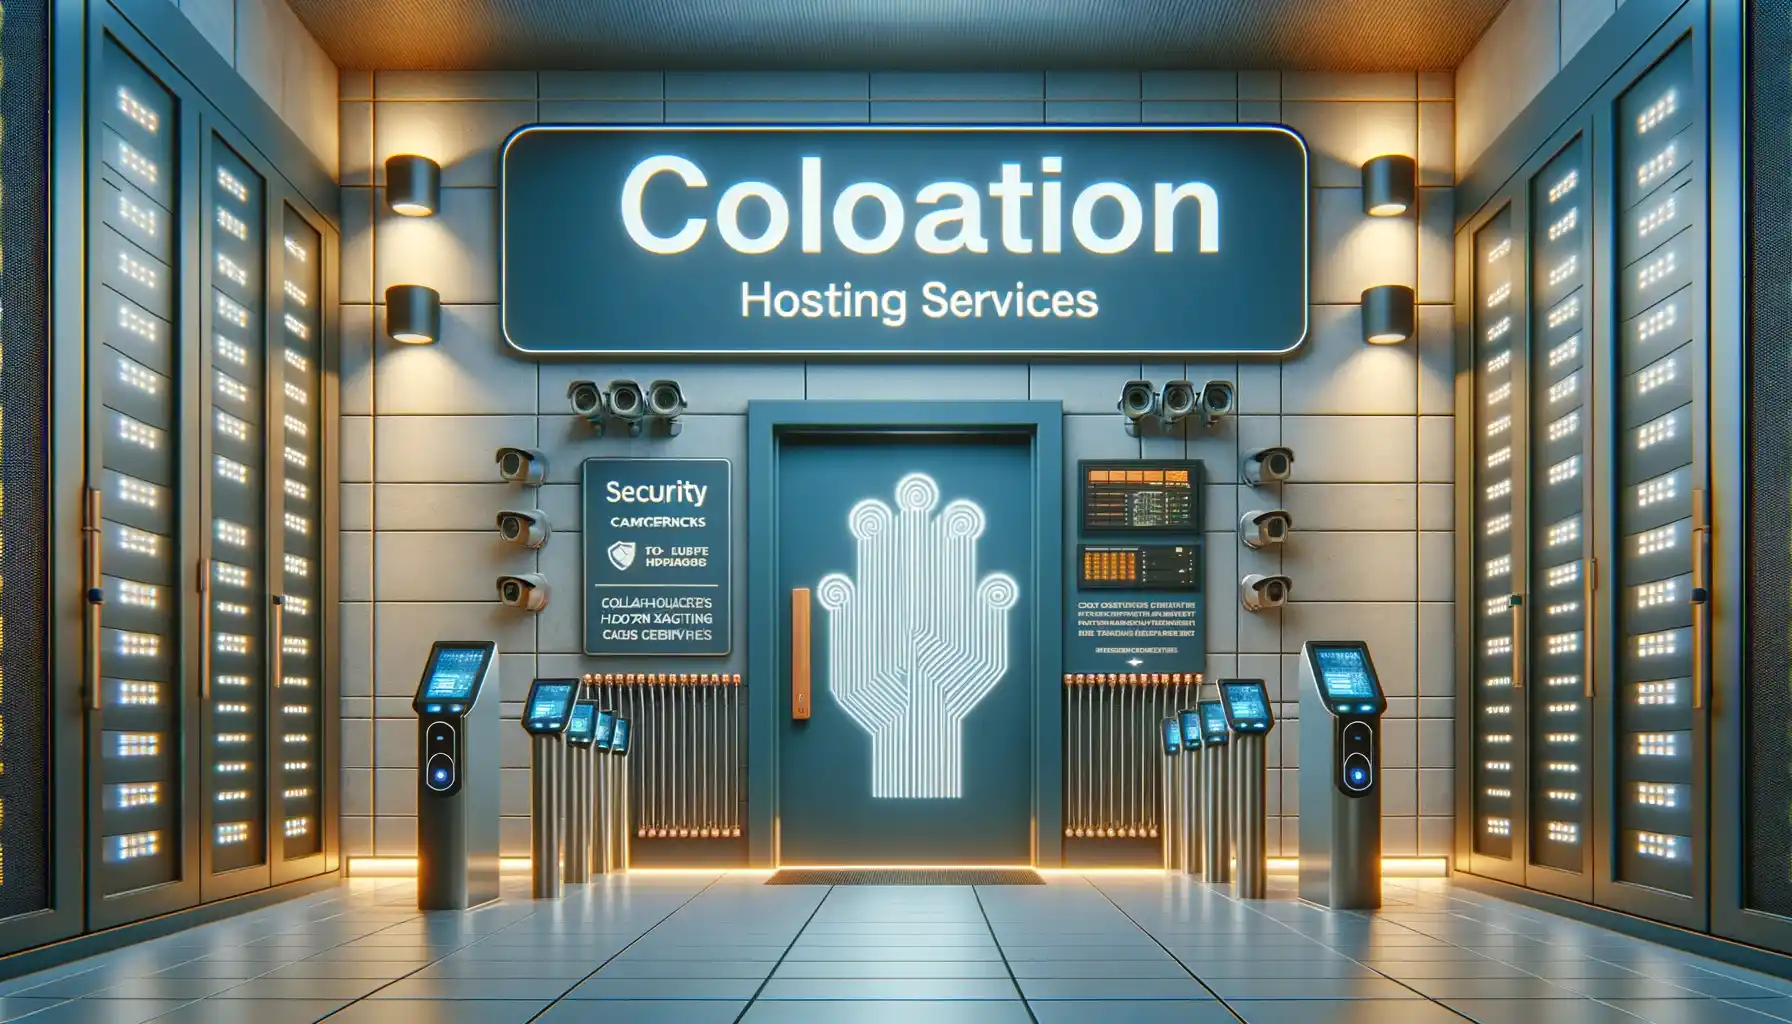 What Is Colocation Hosting?